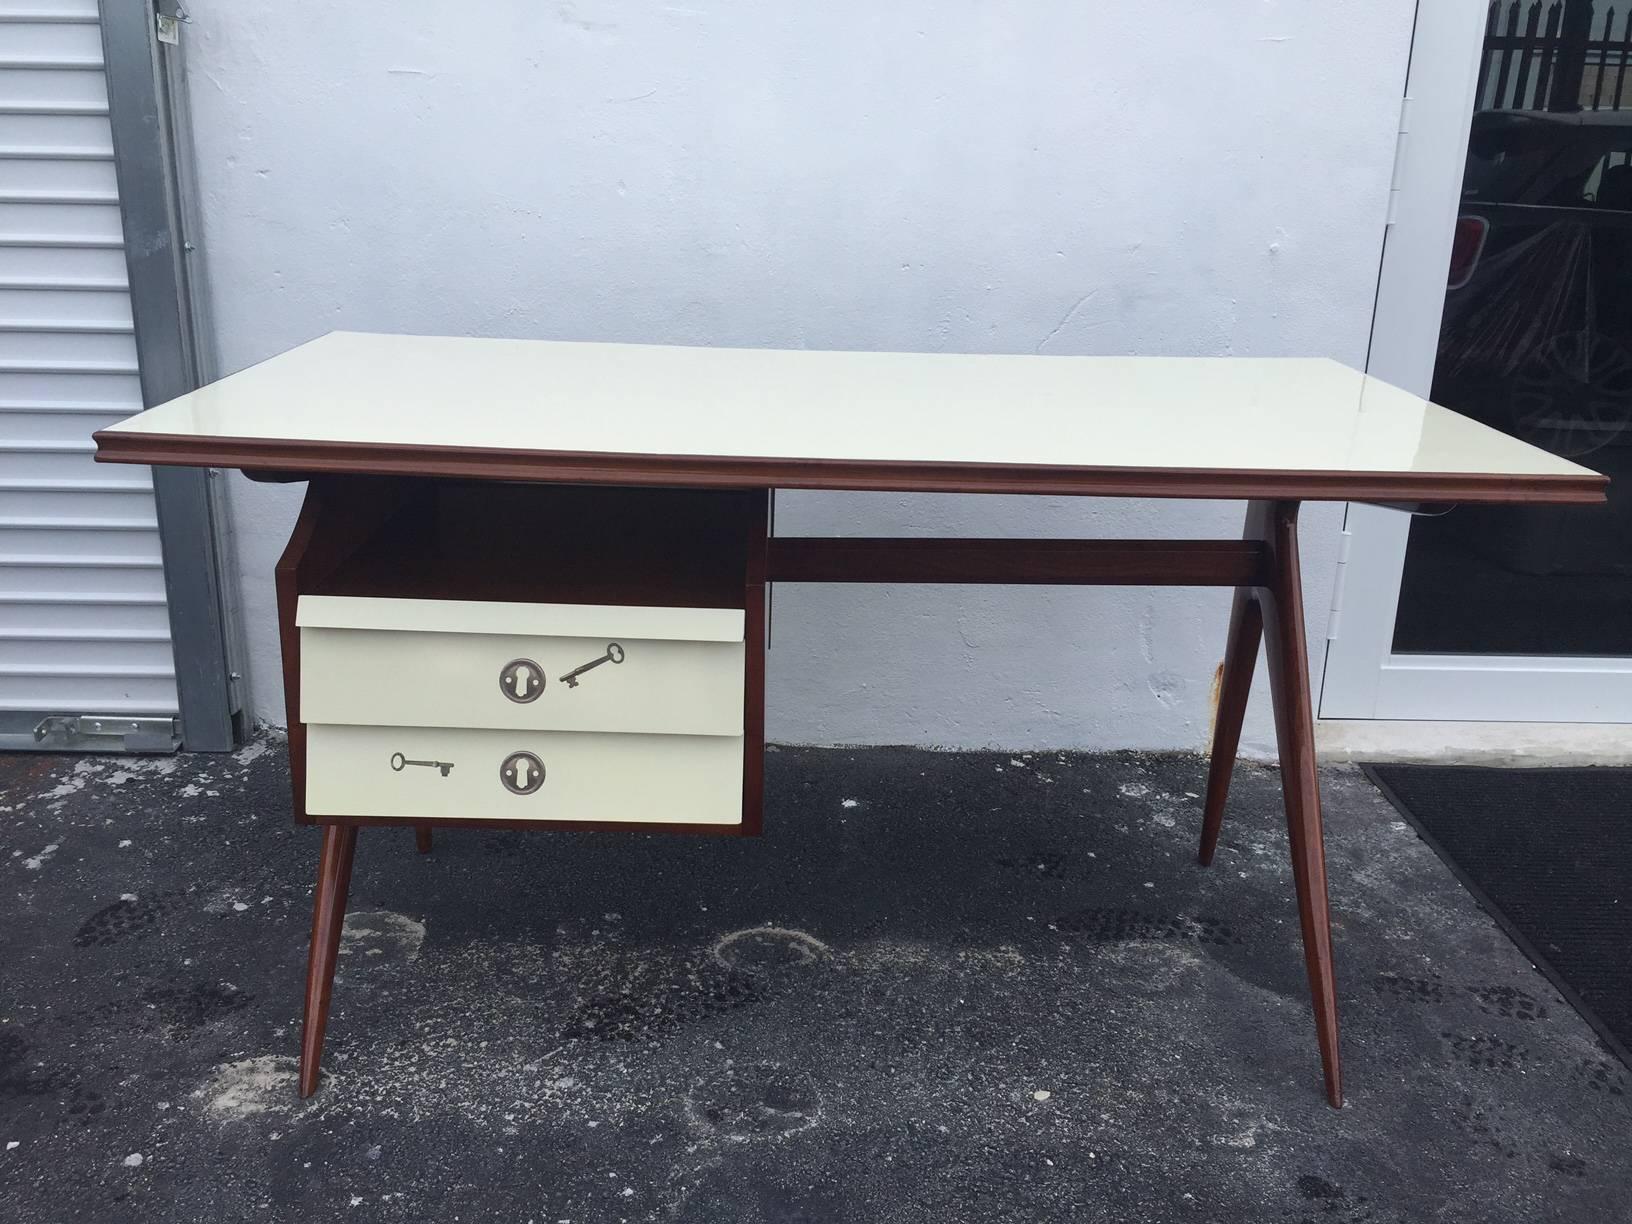 Reminiscent of Fornasetti's work, this attractive and functional desk is adorned with Keys and locks to the front and back. Top is lacquered beige and the desk frame in natural walnut finish. Scissor style legs and two drawers, slide out shelf, and